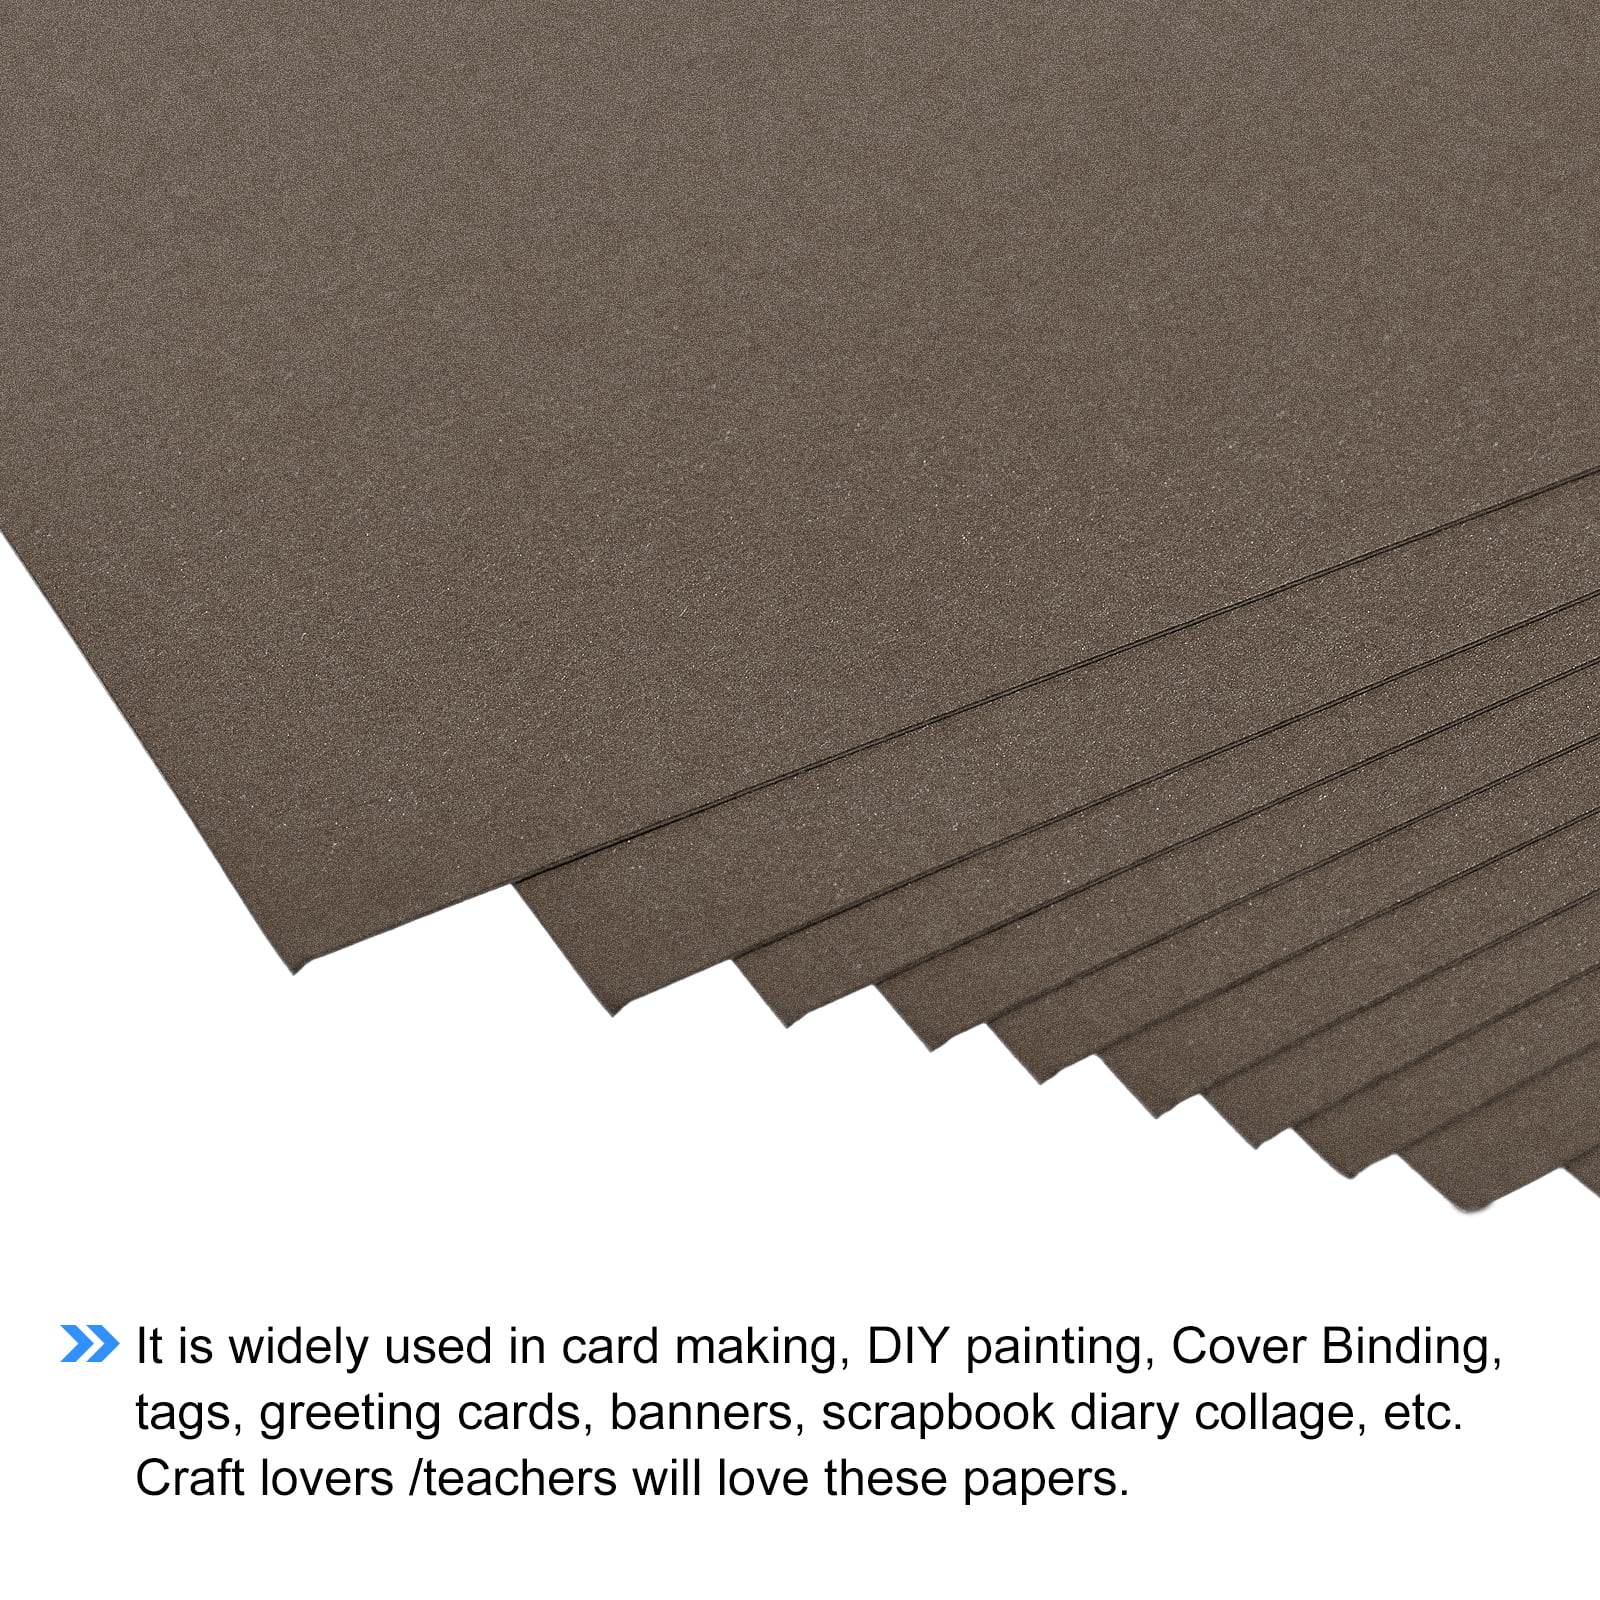 CreGear 25 Sheets White Cardstock 8.5 x 11 Cardstock Paper, Thick Cardstock  92lb/250gsm Card Stock Printer Paper, Card Stock Printer Paper for Card